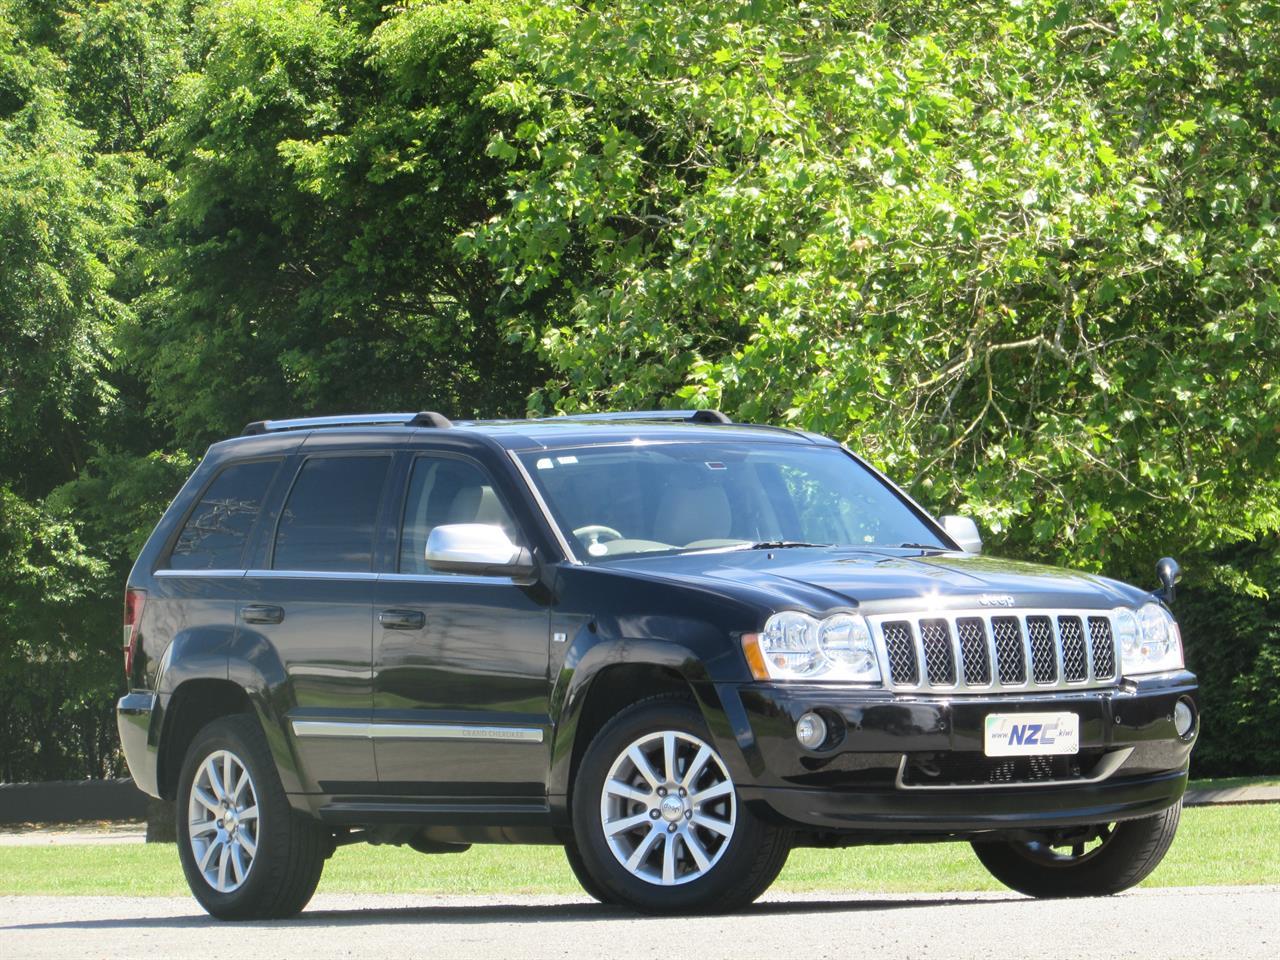 NZC 2006 Jeep Grand Cherokee just arrived to Christchurch